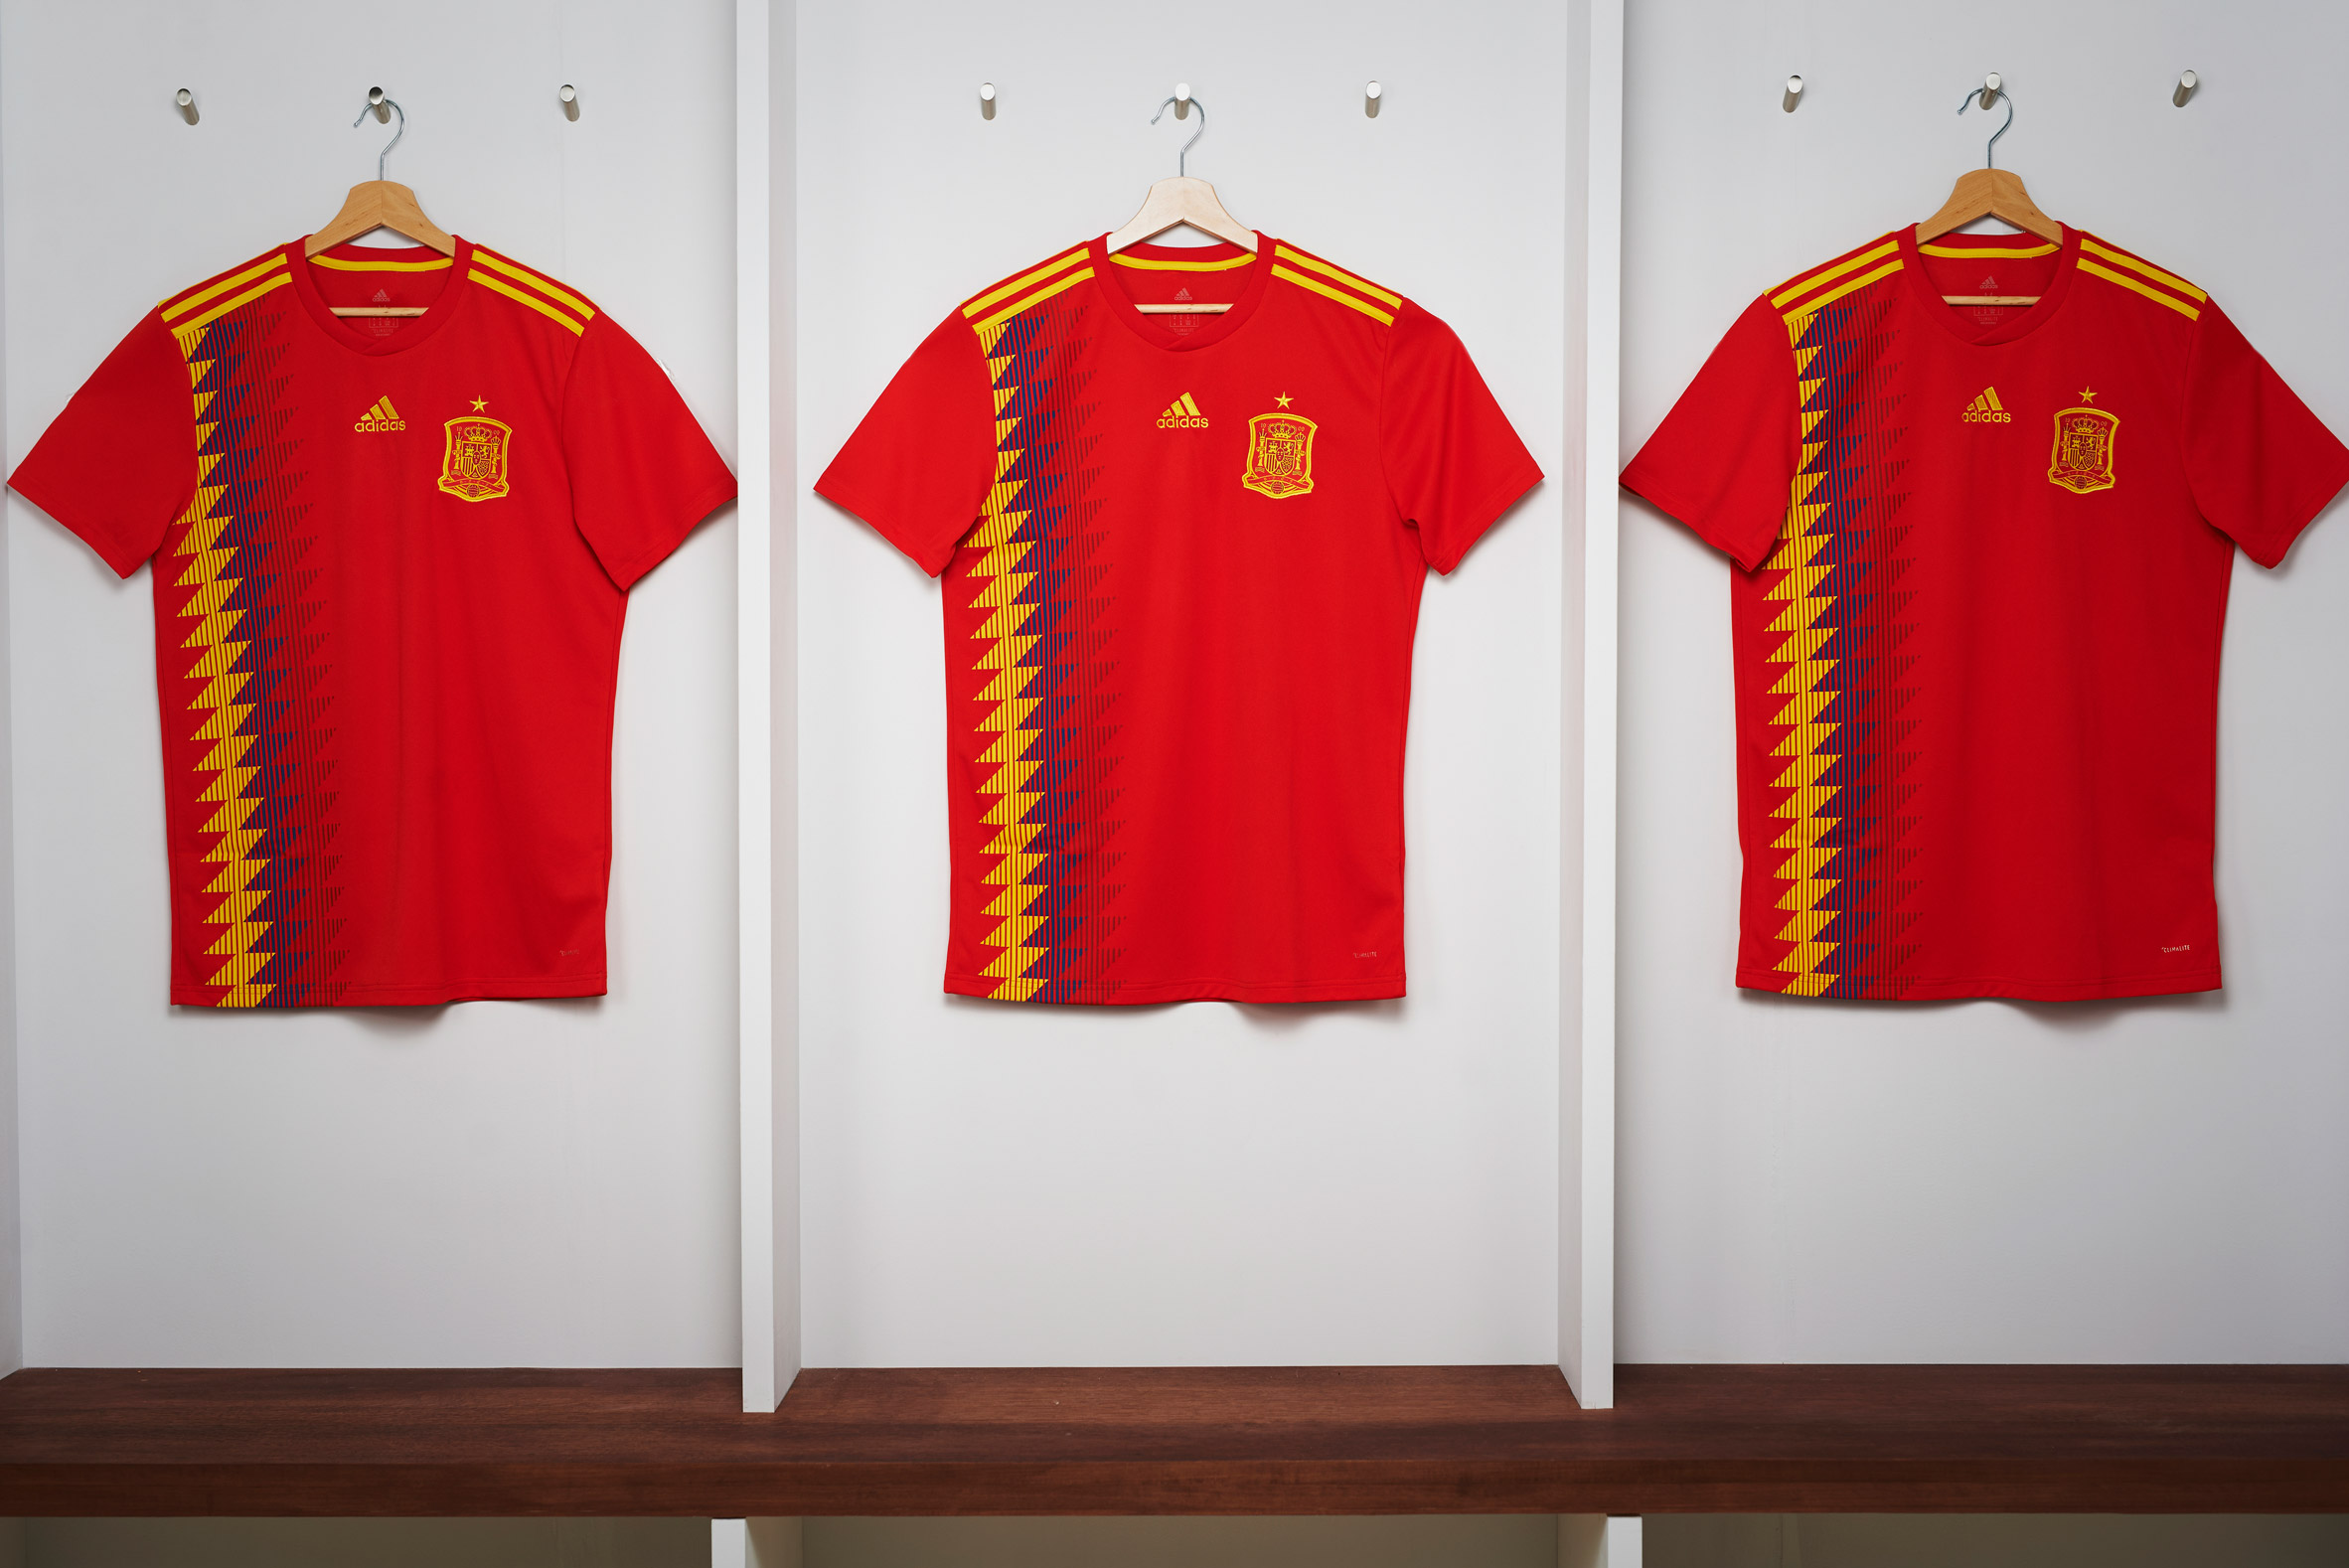 unveils World Cup kits that pay homage to classic football shirts